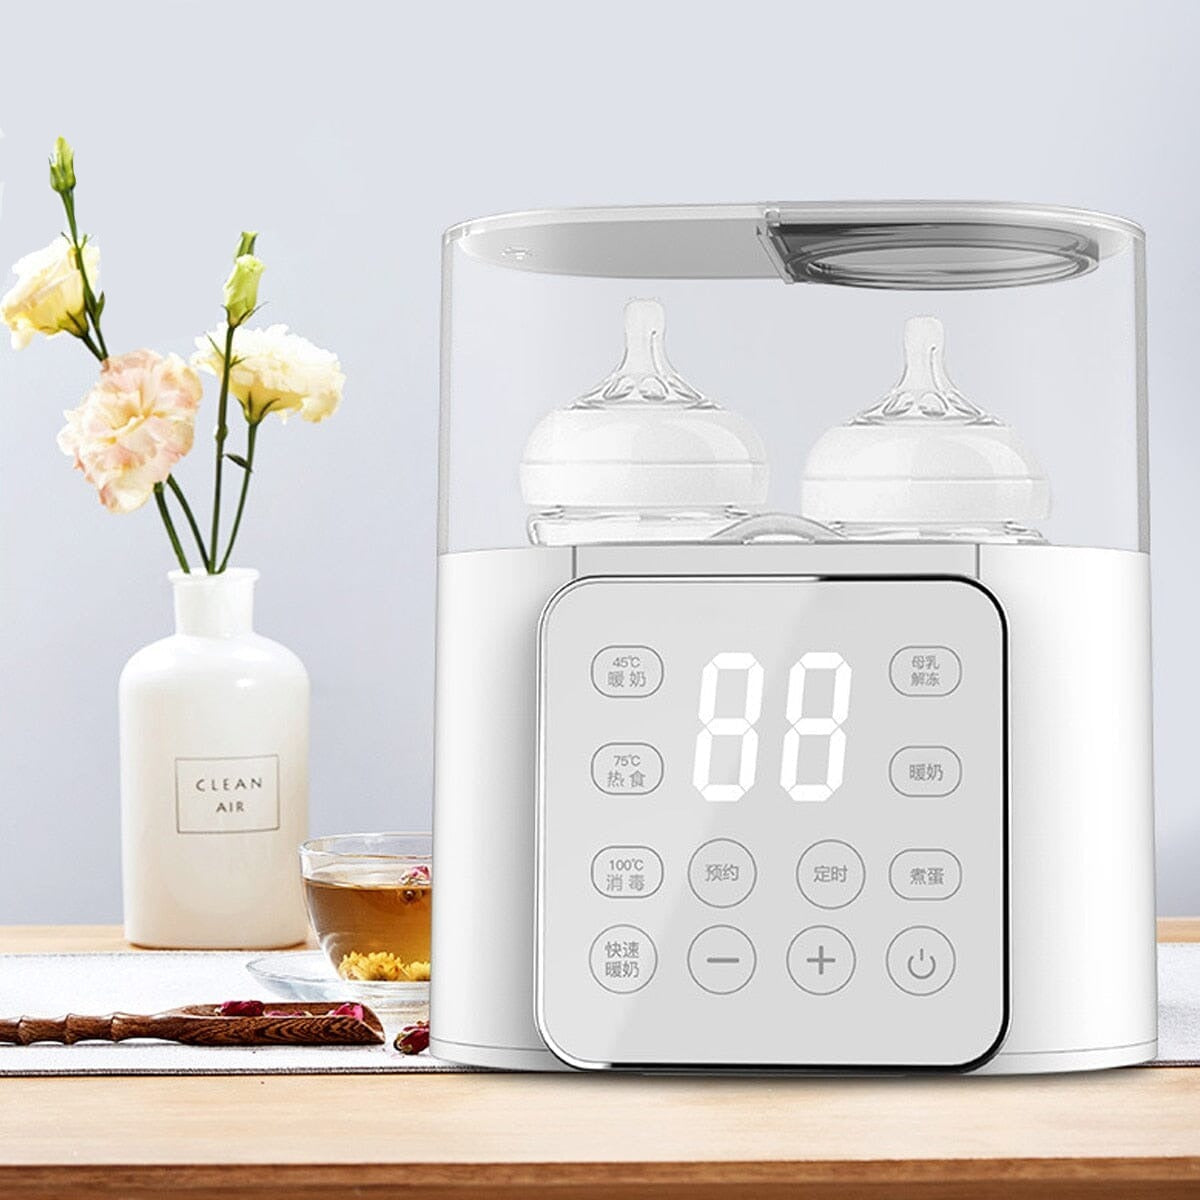 https://www.babybubblestore.com/cdn/shop/products/hibobi-baby-bottle-warmer-9-in-1-fast-baby-food-heater-bpa-free-warmer-with-accurate-temperature-control-breatmilk-0-baby-bubble-store-404659.jpg?v=1670721884